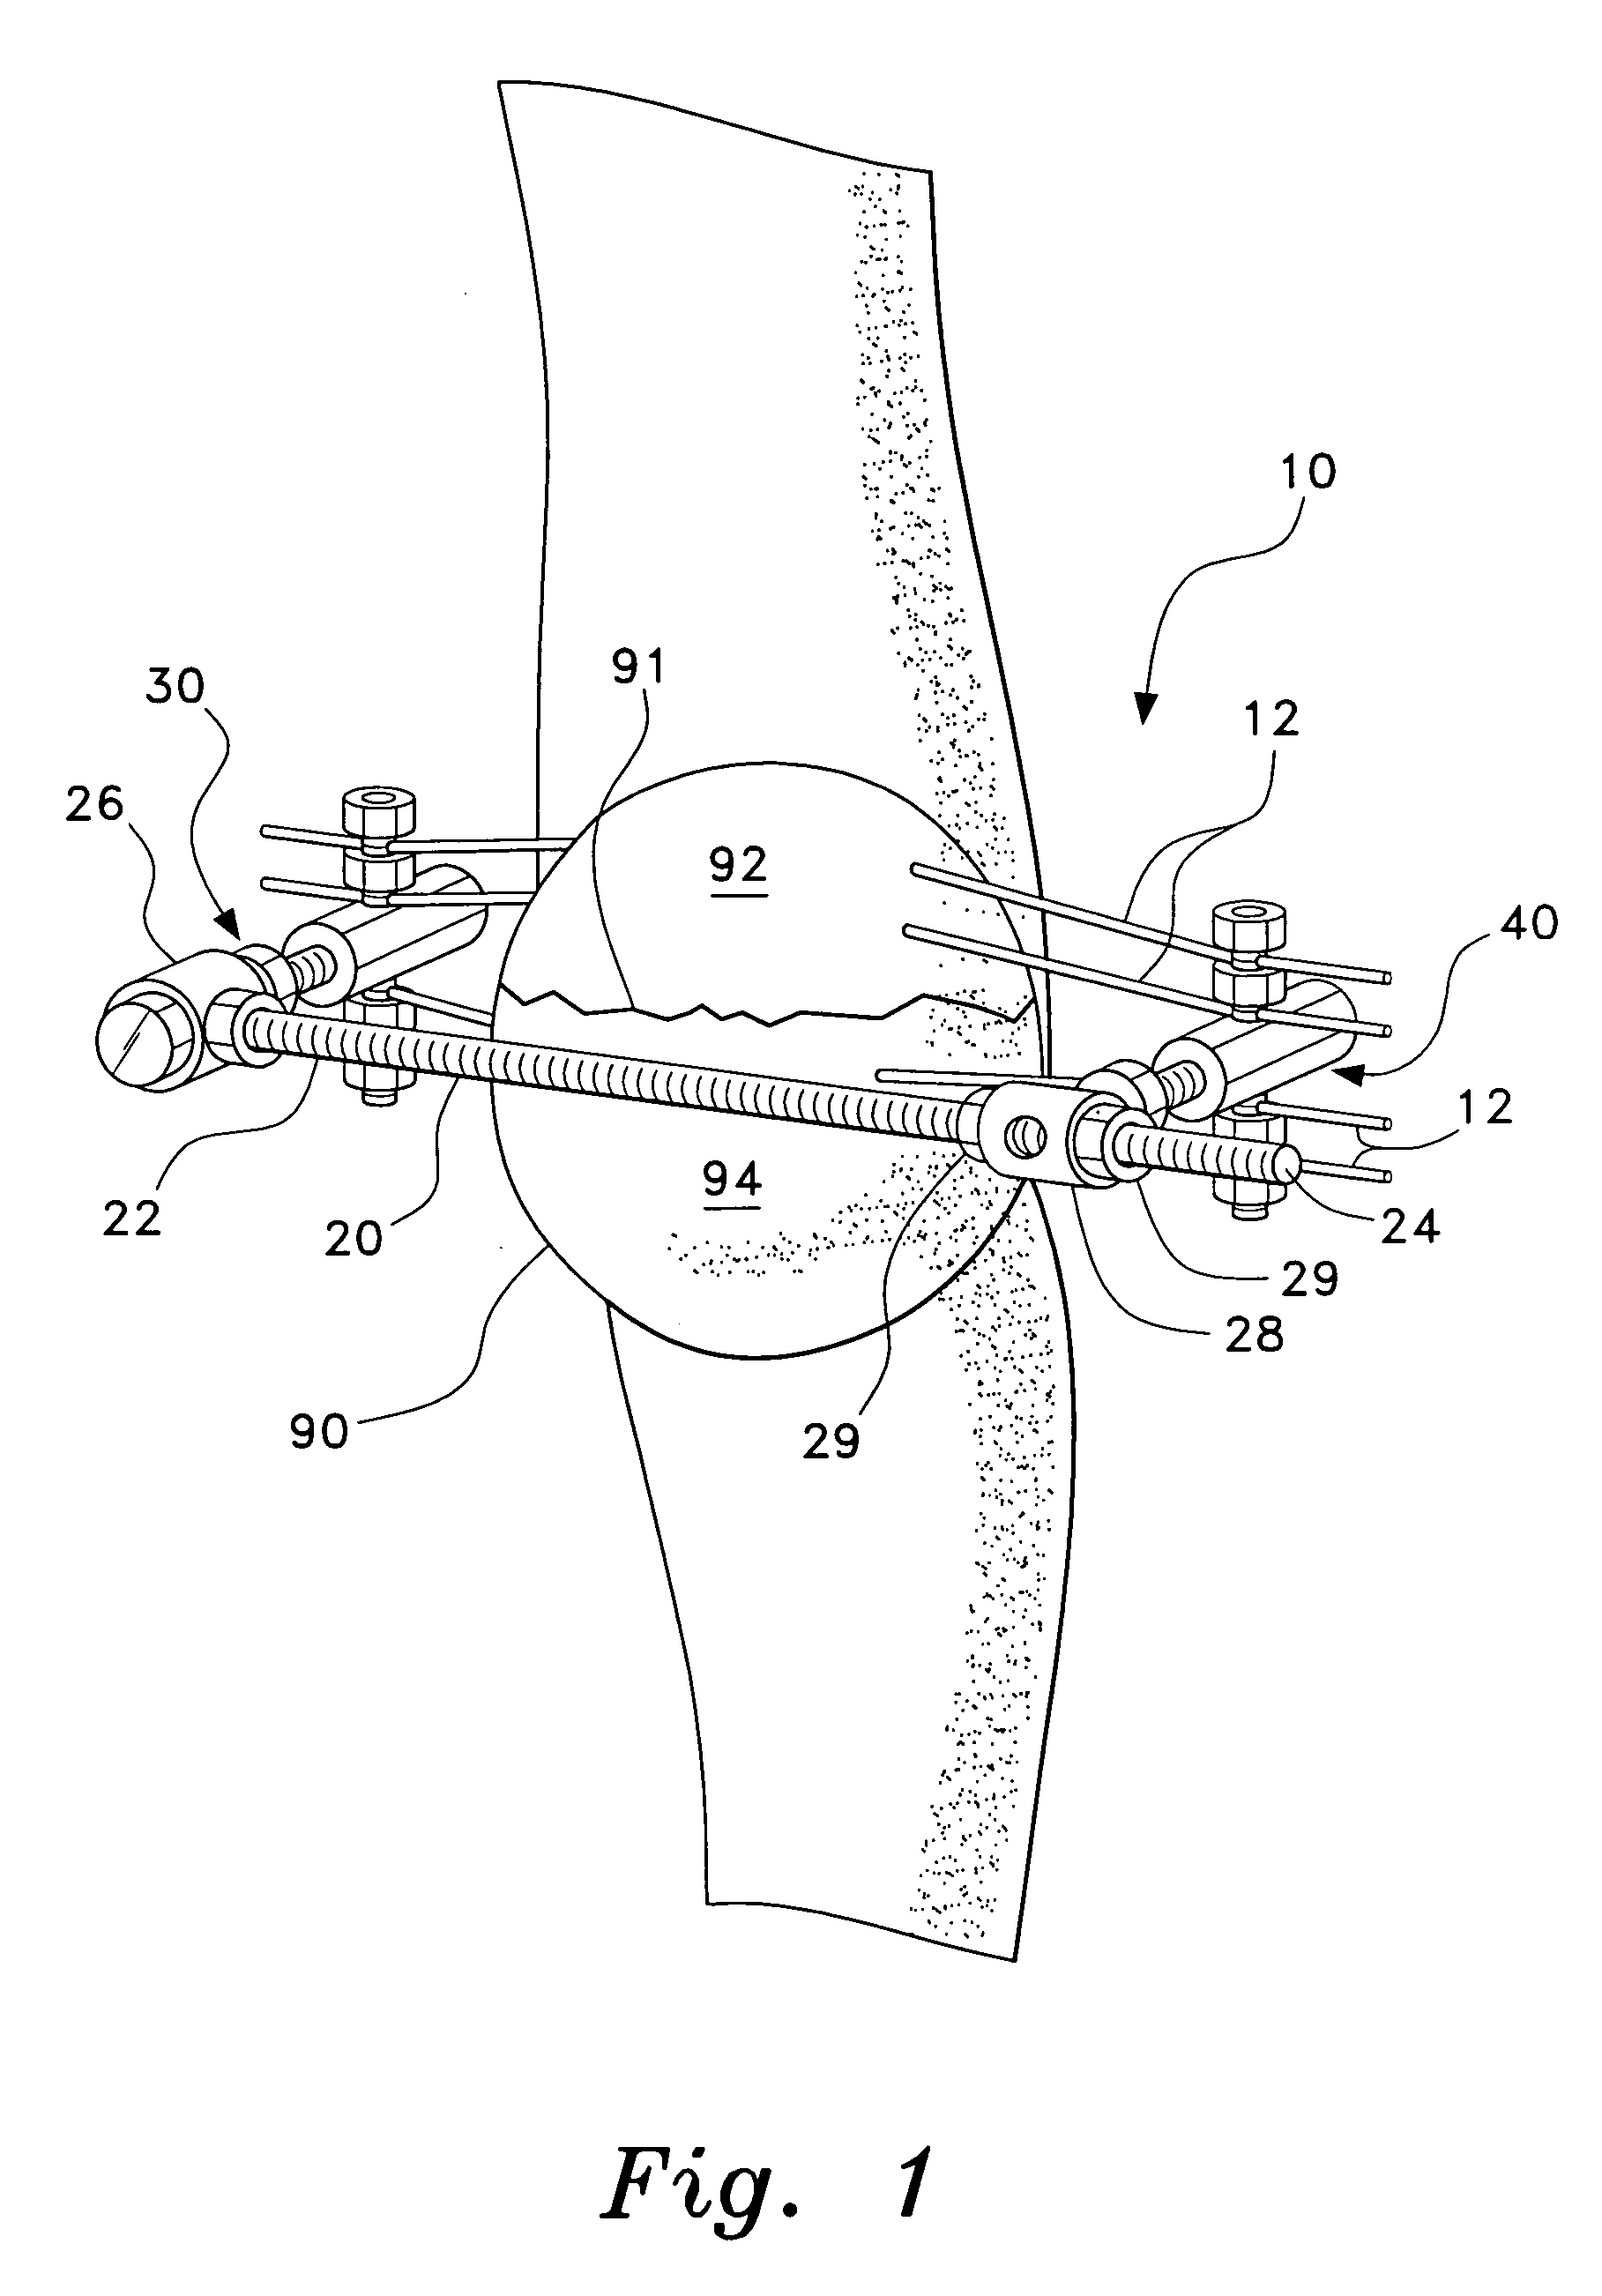 Method and apparatus for external fixation of bone fractures